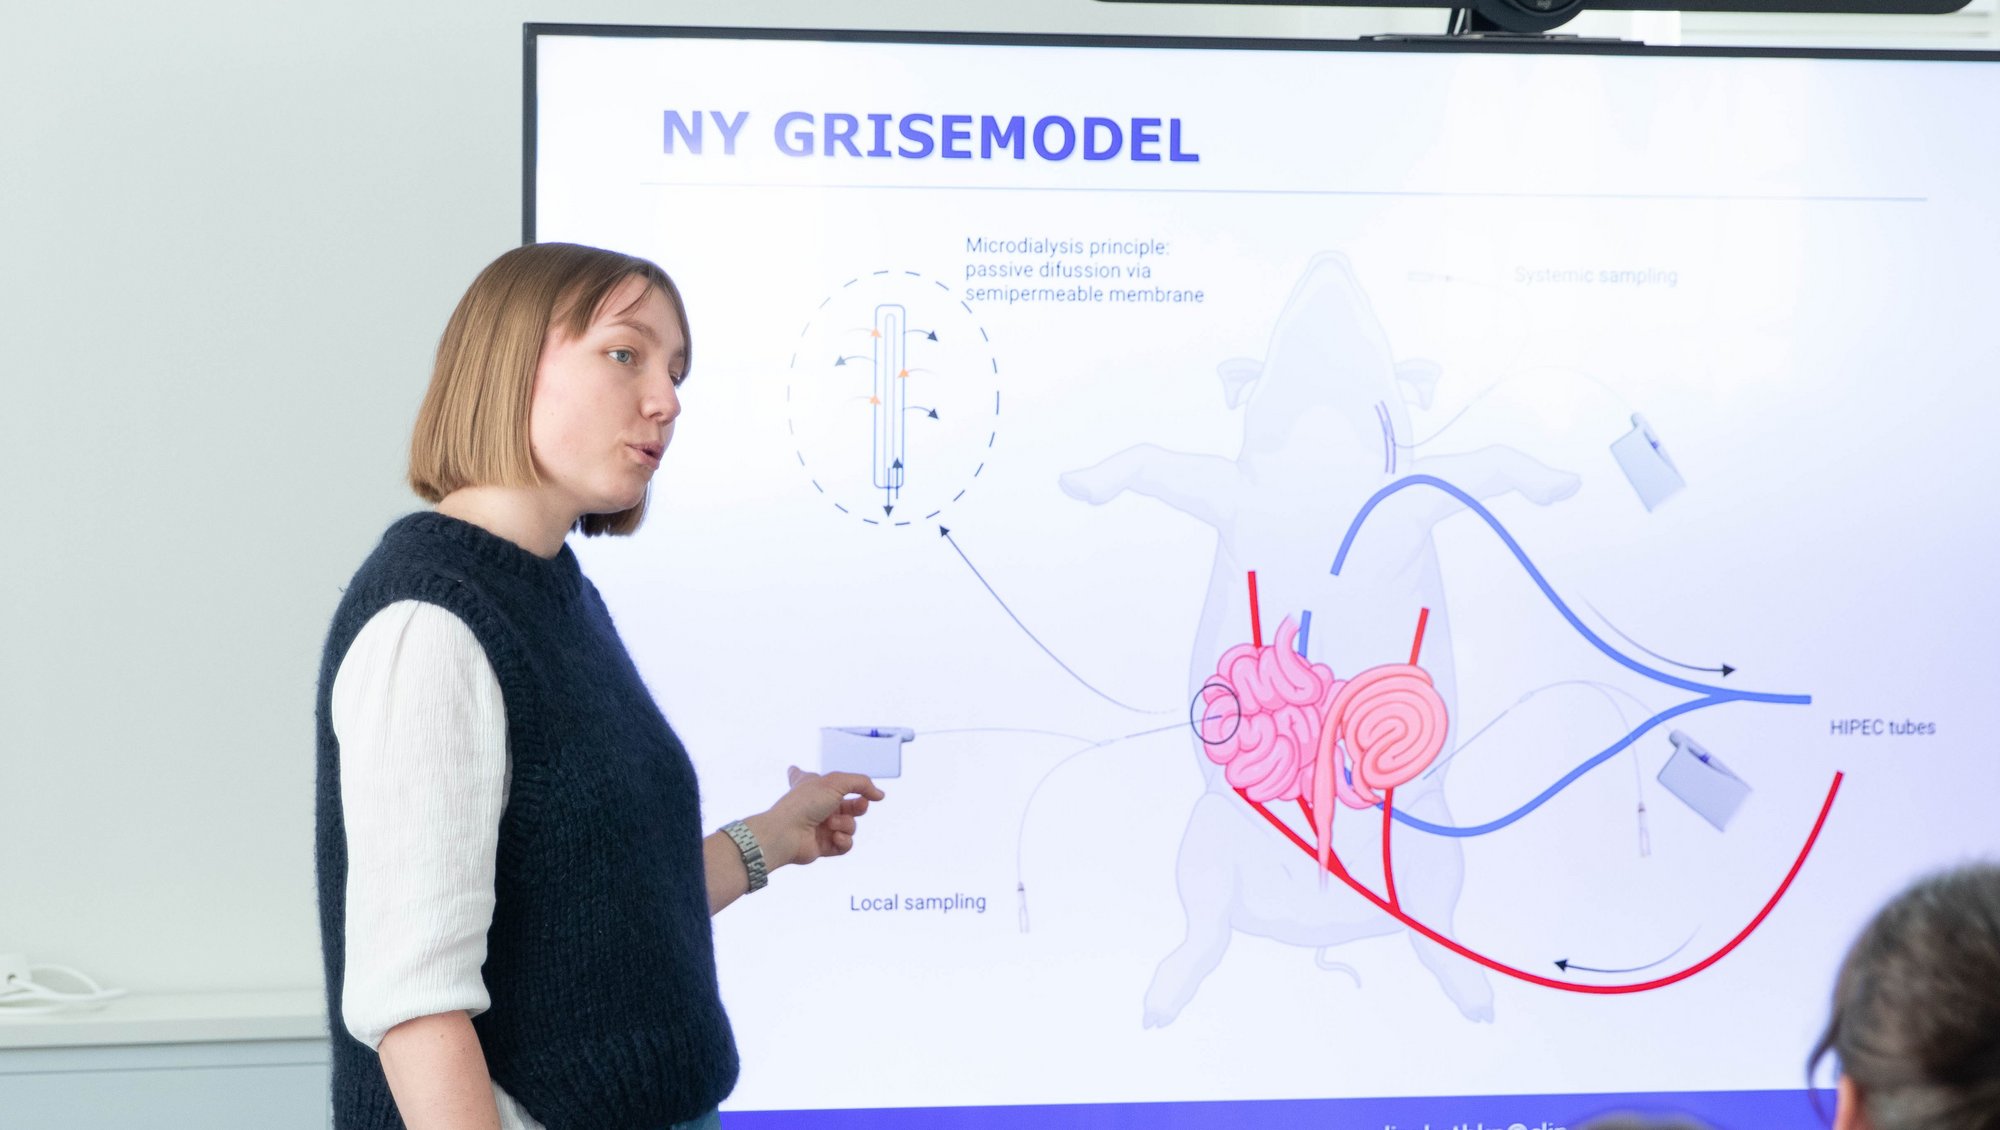 Elisabeth Krogsgaard Petersen (medicine) received the award for her project on measurement of the chemotherapeutic agent carboplatin in the treatment Hyperthermic Intraperitoneal Chemotherapy (HIPEC). Photo: Simon Fischel, AU Health.